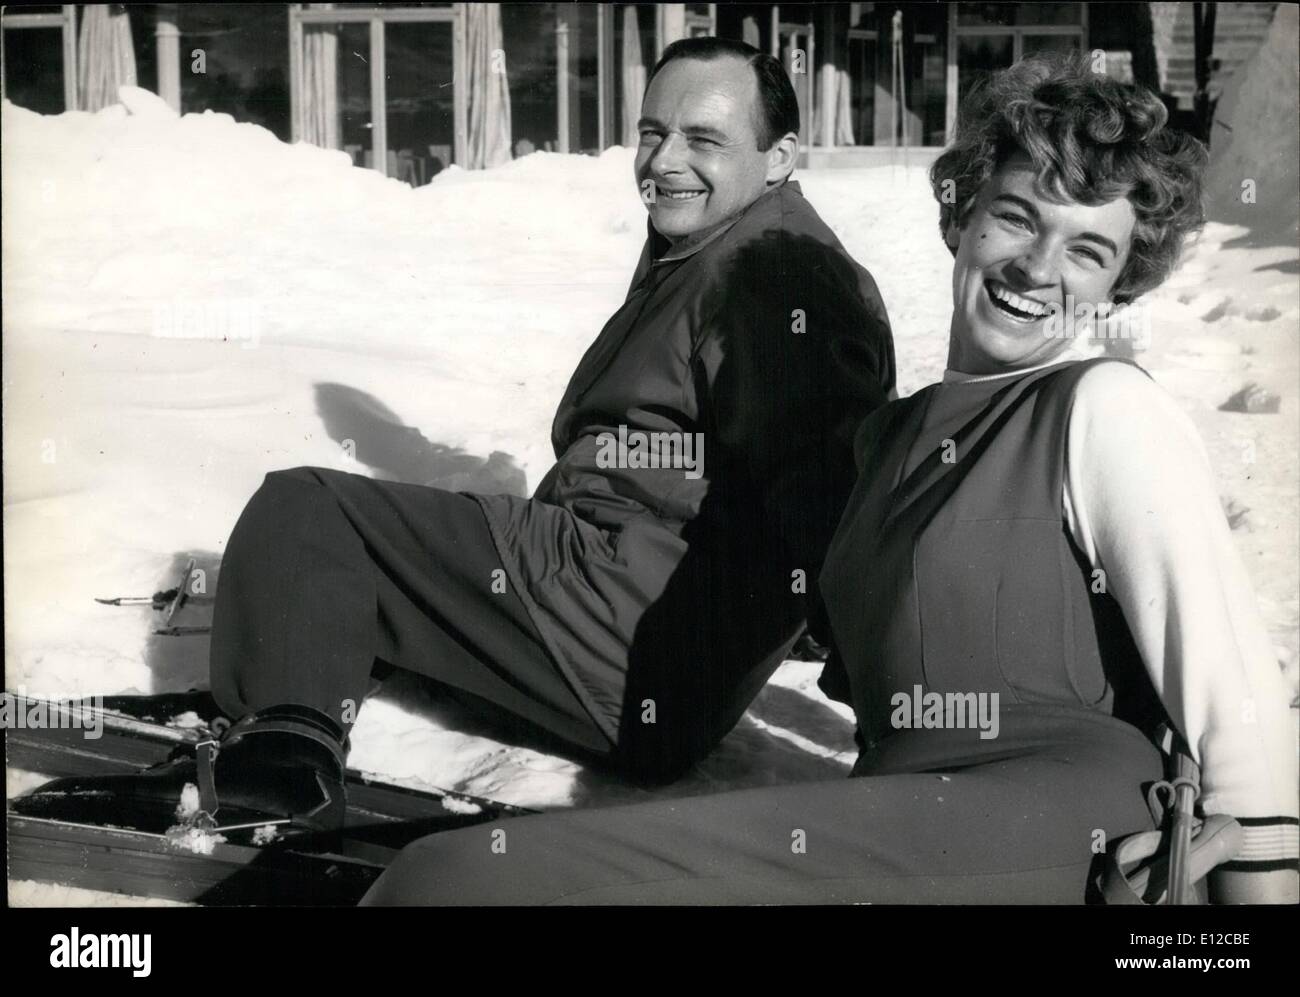 Dec. 16, 2011 - After The Water The Snow: Speed-champion on water, Donald Campbell is spending his honeymoon with his wife, Tania Bern at Courchevel, one of the most famous French resort for winter sports. Photo shows. Donald Campbell with his wife. Stock Photo